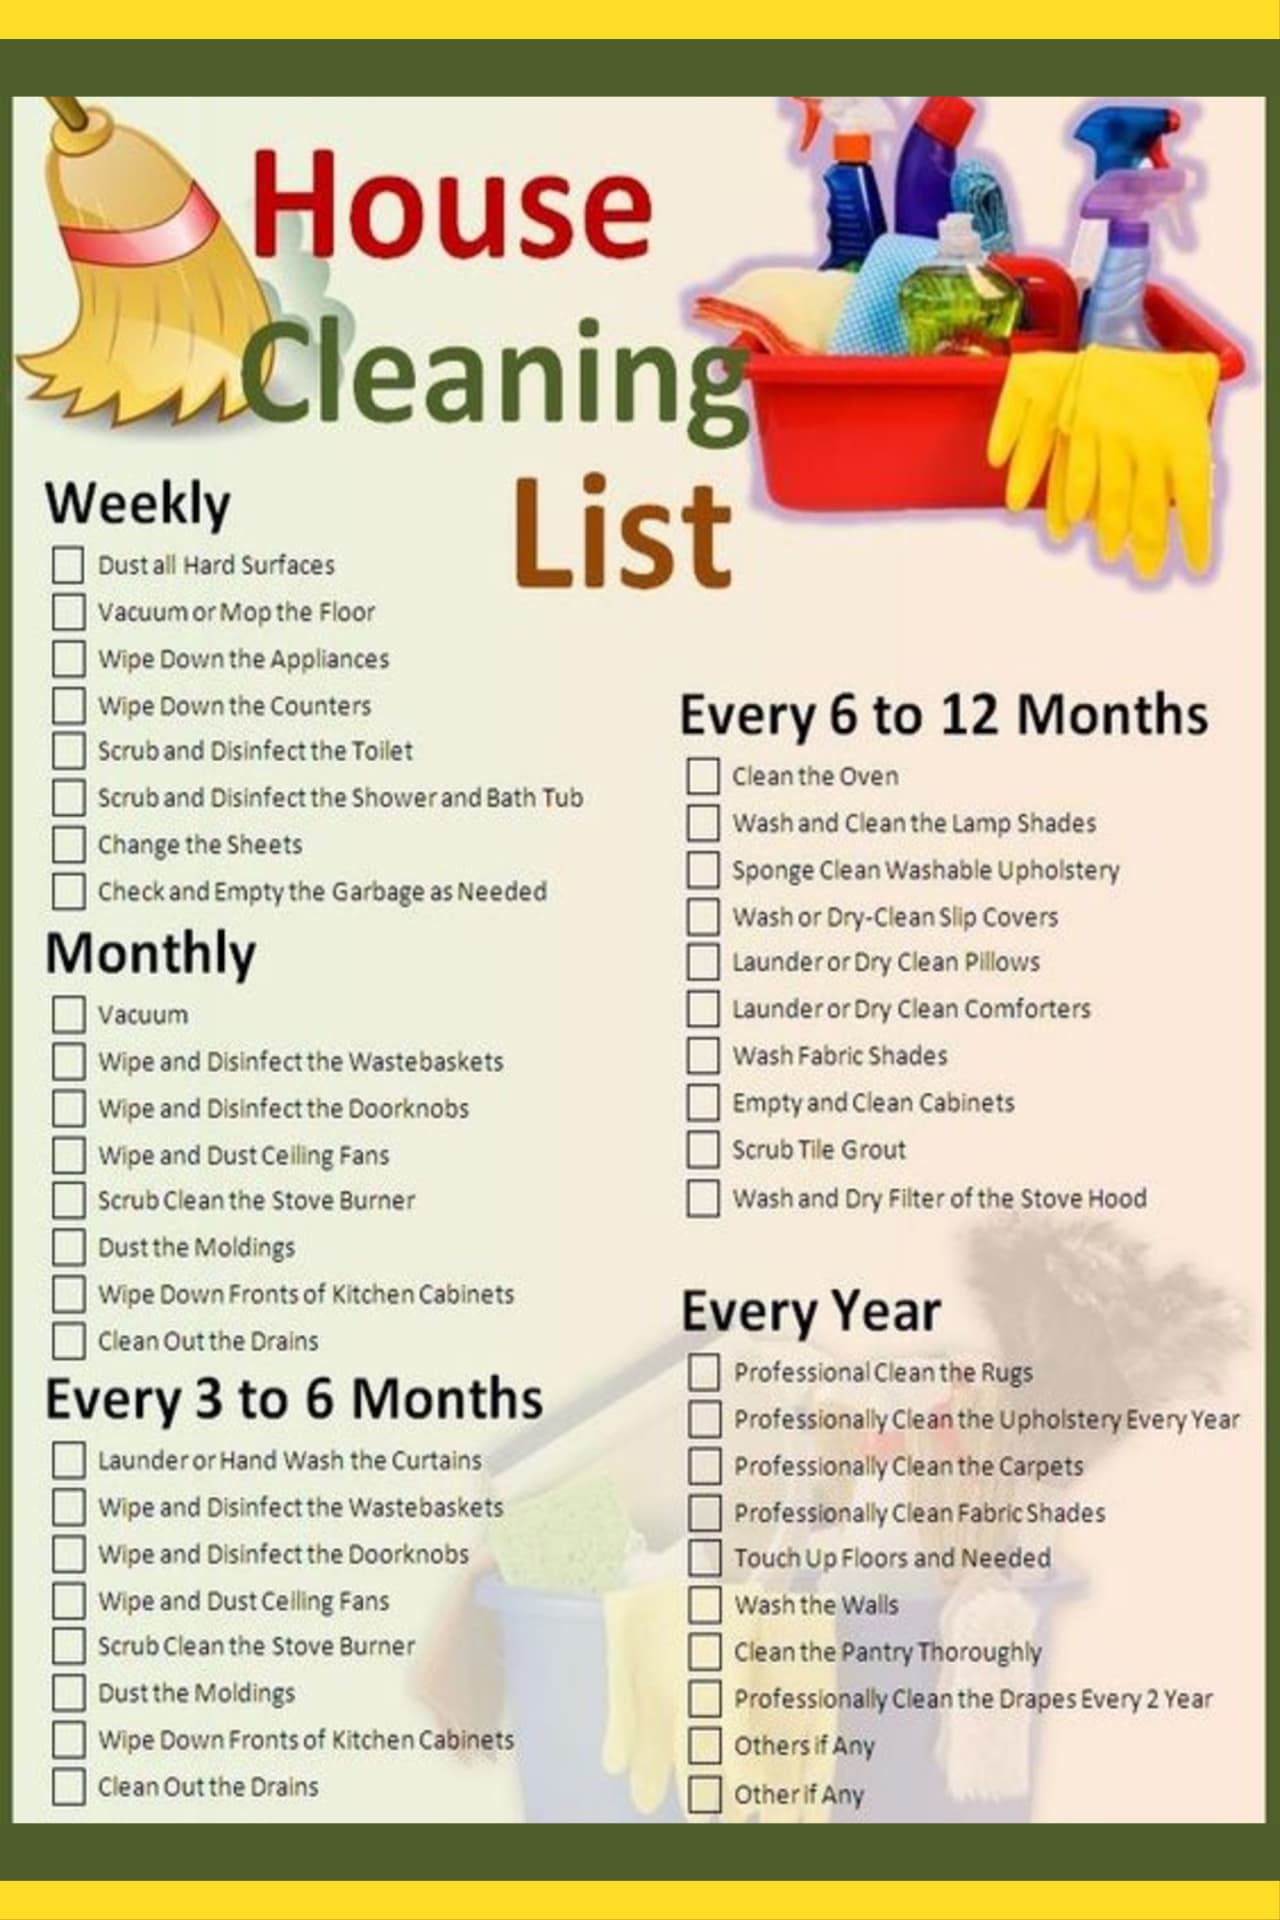 How to clean house like a Pro - or like a maid - quickly clean house top to bottom with these house cleaning schedules and checklists even when overwhelmed or with kids or with NO motivation to clean at all. clean your house like a pro in one day - yes FAST with these house cleaning tips.